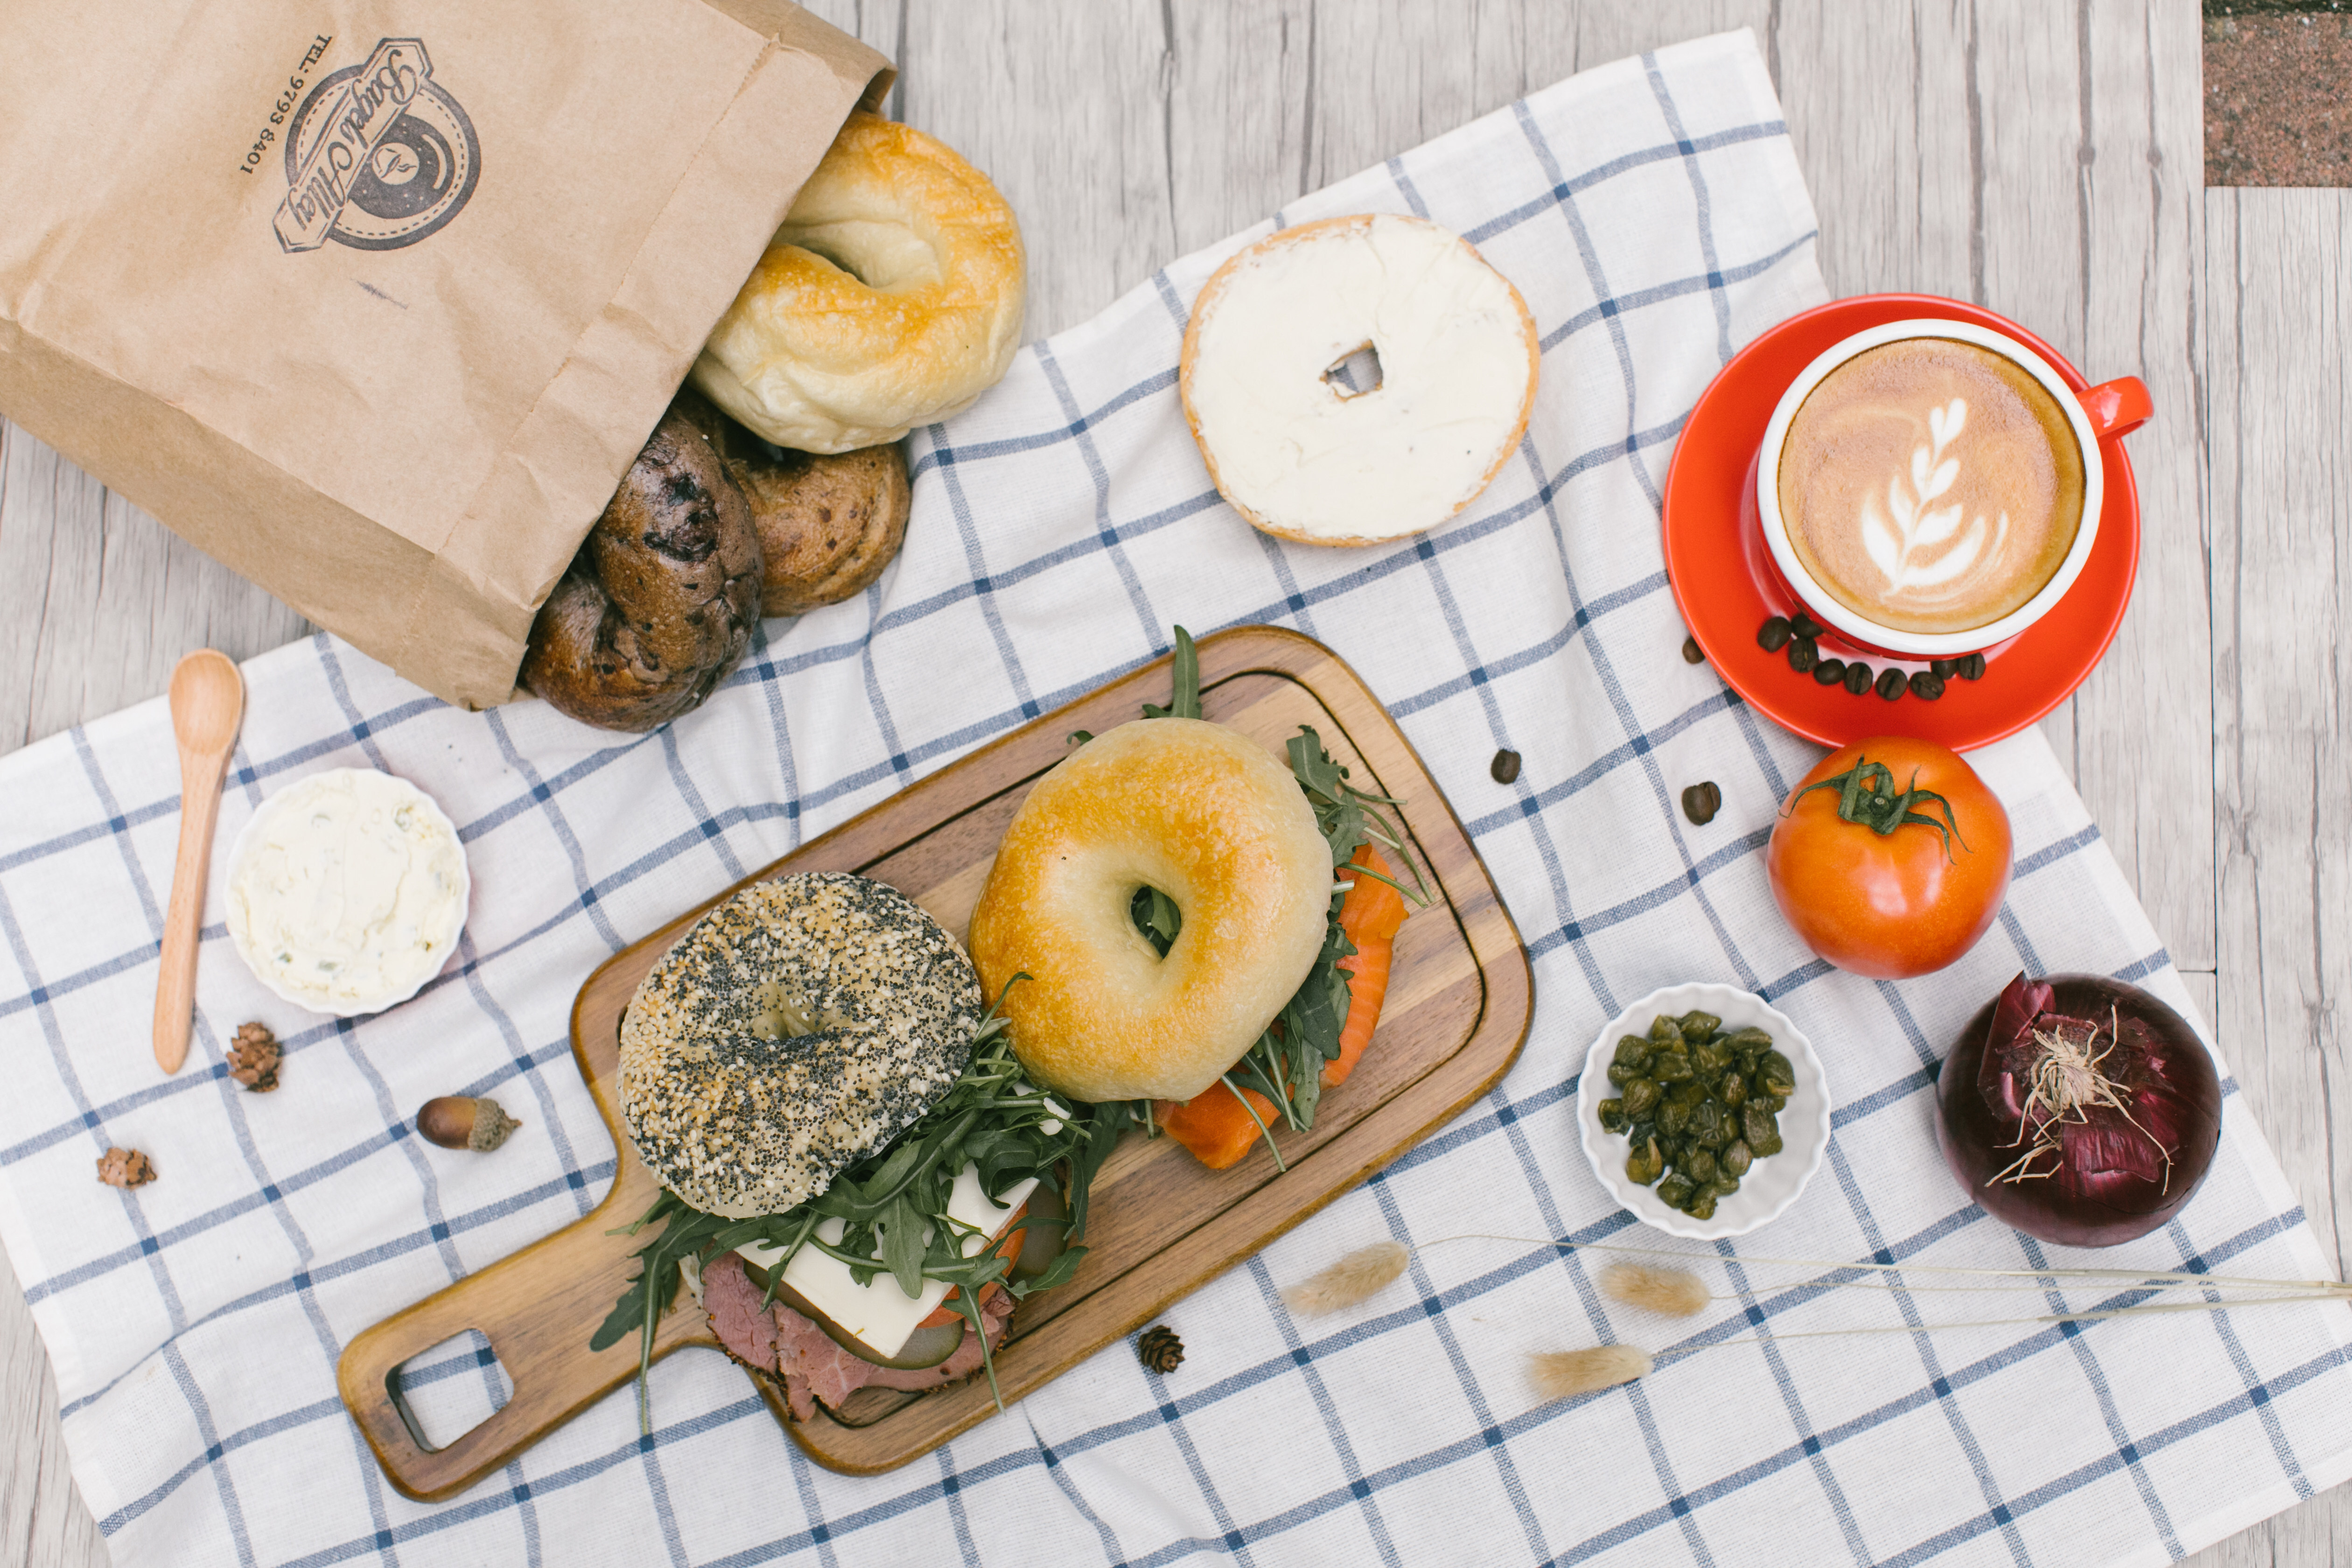 Bakers on Instagram are turning their focus to bagels and dream of owning a real brick and mortar bagel shop, like James Chan, who owns Bagels Alley (pictured), or Rebecca Schrage of Schragels. 